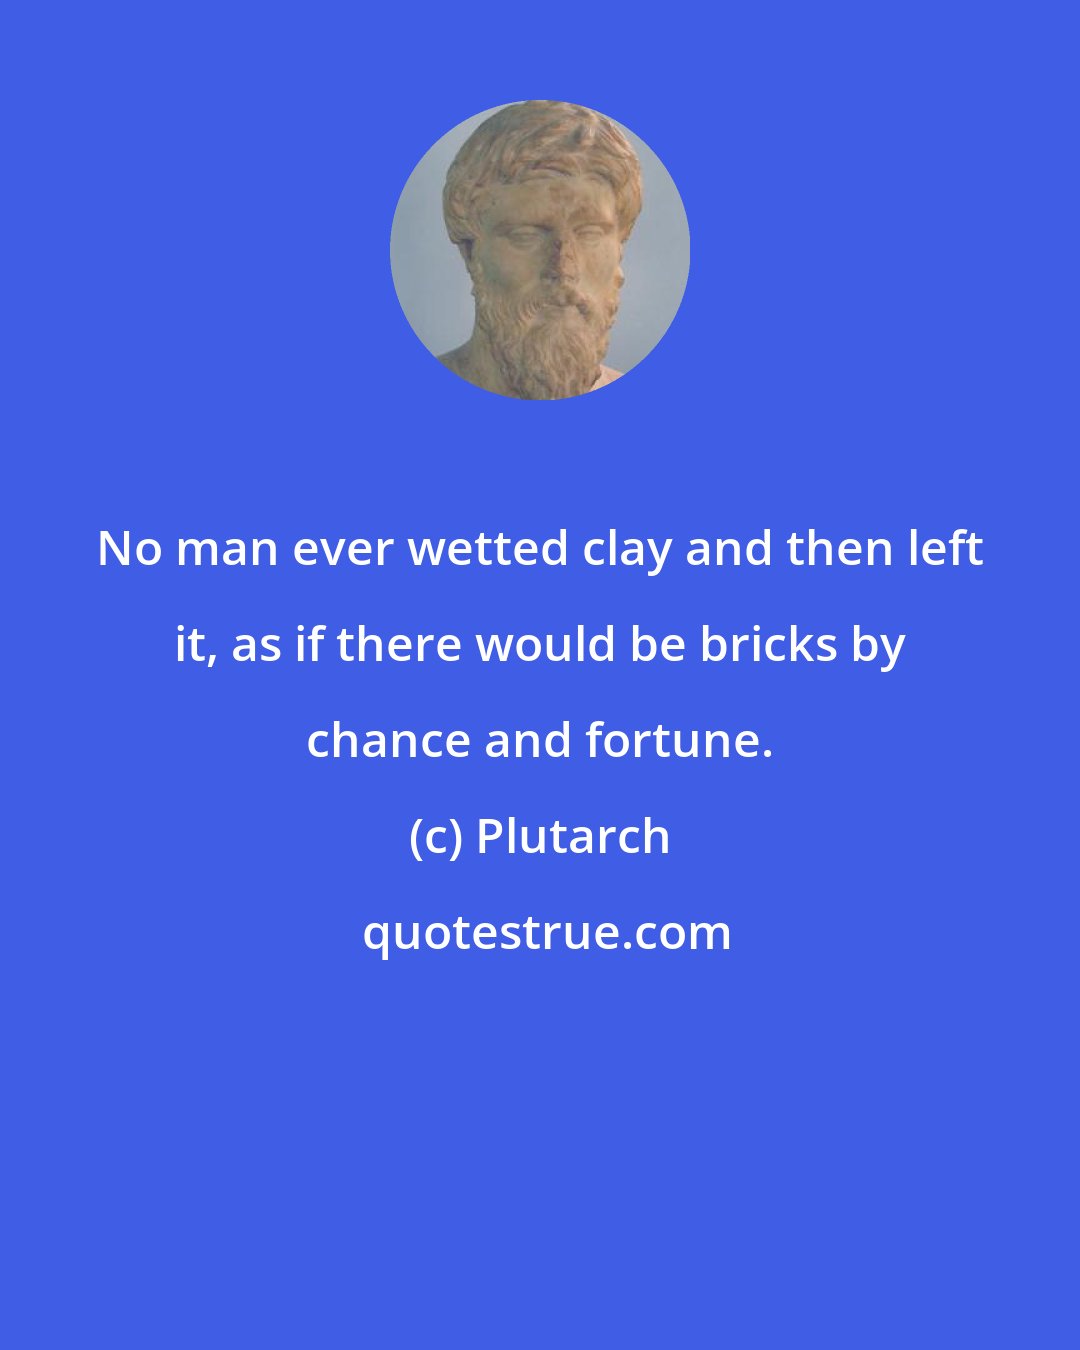 Plutarch: No man ever wetted clay and then left it, as if there would be bricks by chance and fortune.